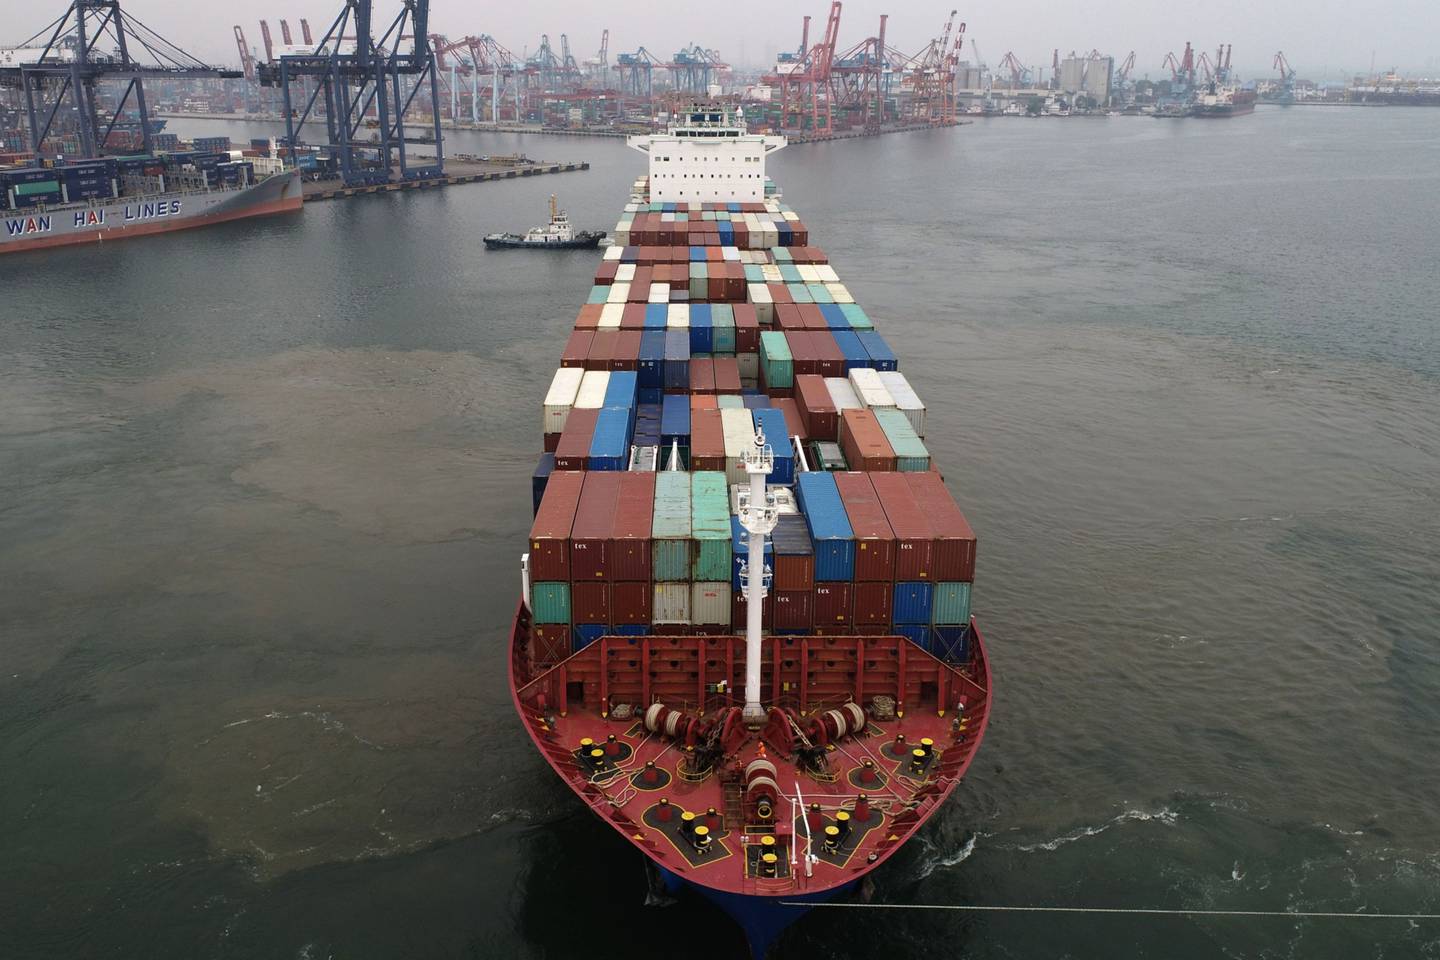 The Xin Ri Zhao container ship arrives at Tanjung Priok Port in Jakarta, Indonesia, on Tuesday, July 13, 2021.